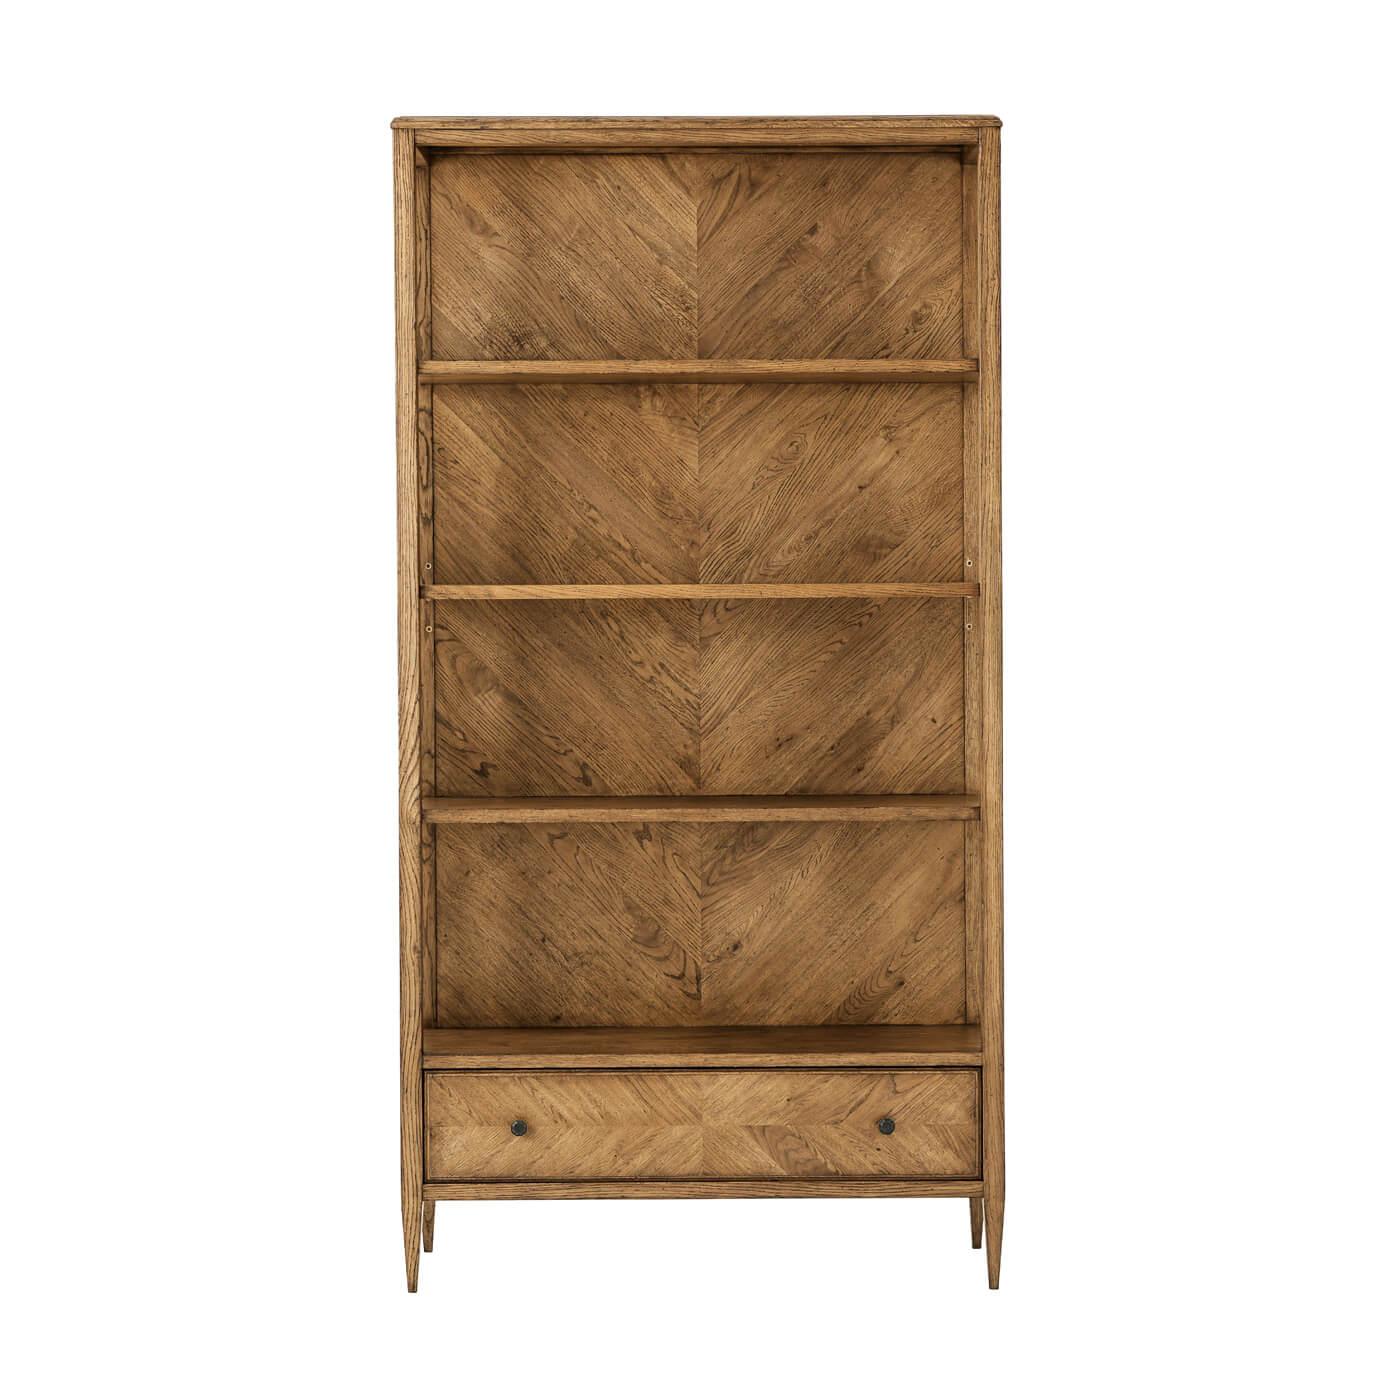 A Modern herringbone parquetry bookcase in our light oak Dusk finish with three veneered shelves and a herringbone parquetry design on the bottom drawer. It sits on tapered legs with Verde Bronze finished knobs. A beautiful functional piece for